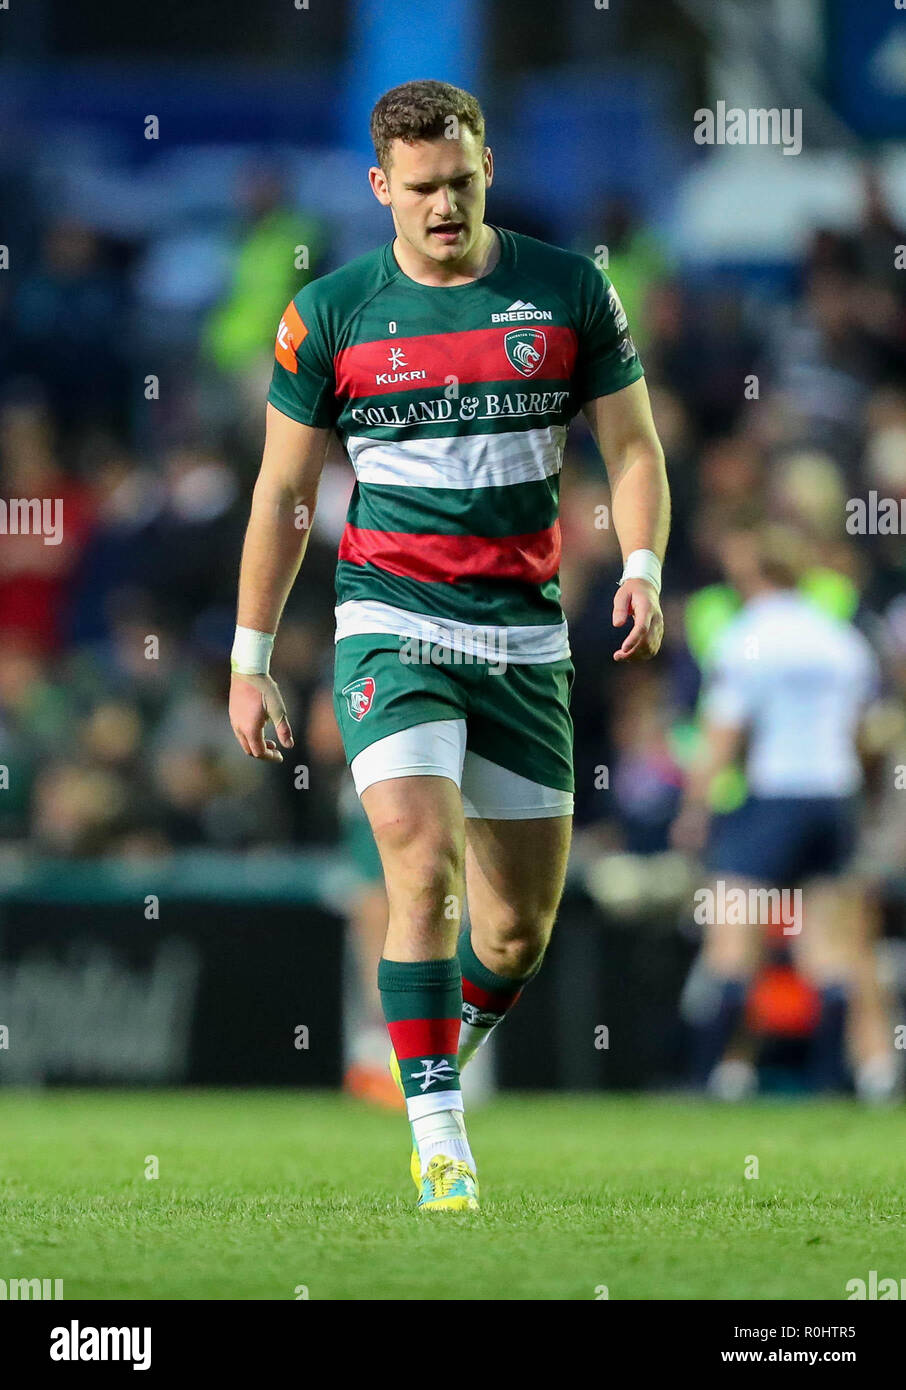 Leicester, Regno Unito. 3 novembre 2018. Premiership Rugby Union. Leicester Tigers rfc v Worcester Warriors RFC. George vale la pena in azione per Leicester Tigers durante il Premiership Rugby Cup match giocato a Welford Road Stadium, Leicester, Inghilterra. © Phil Hutchinson/Alamy Live News Foto Stock